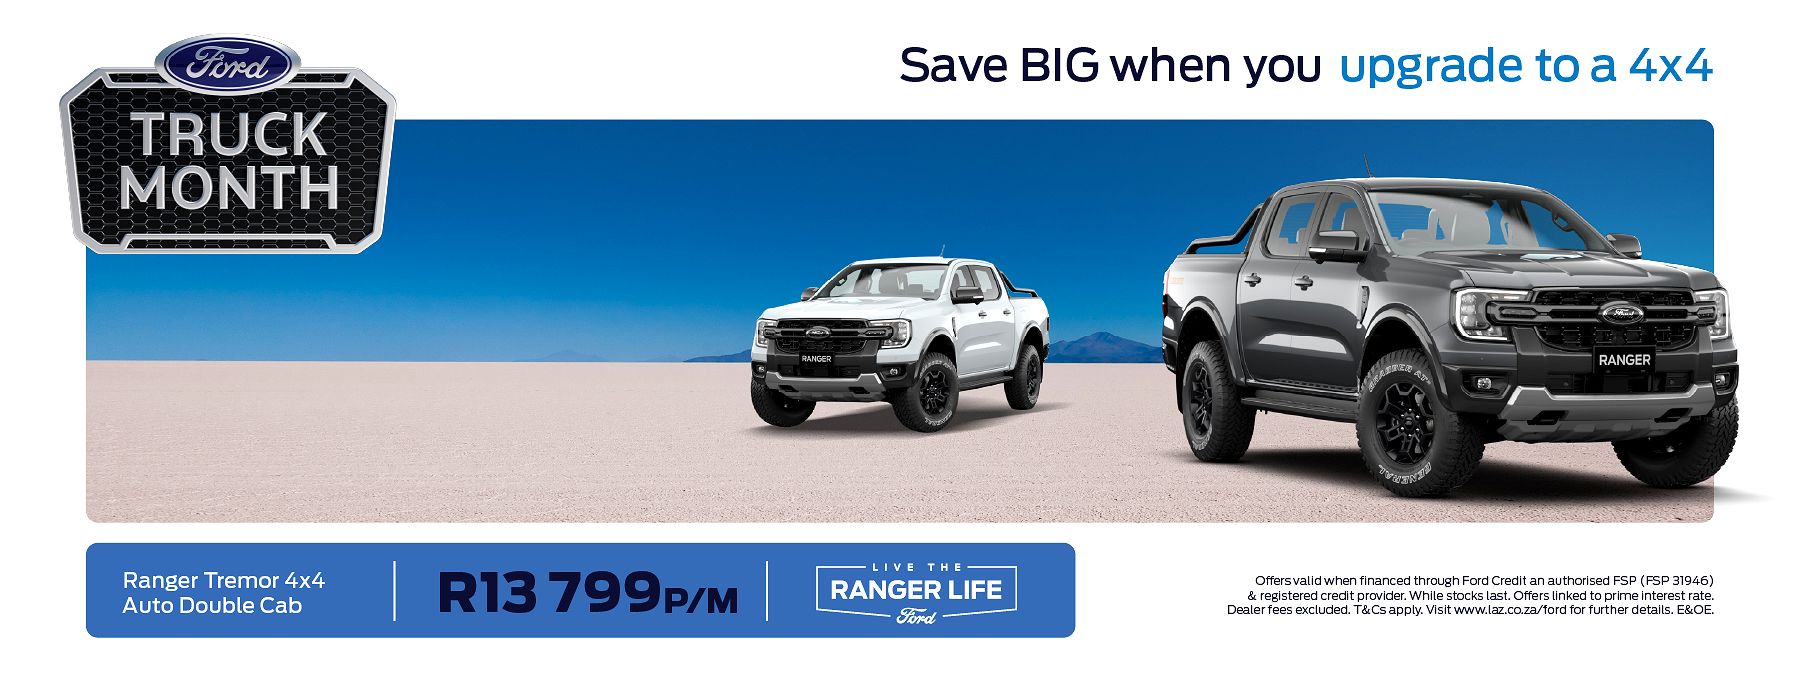 Save BIG when you Upgrade to a 4x4